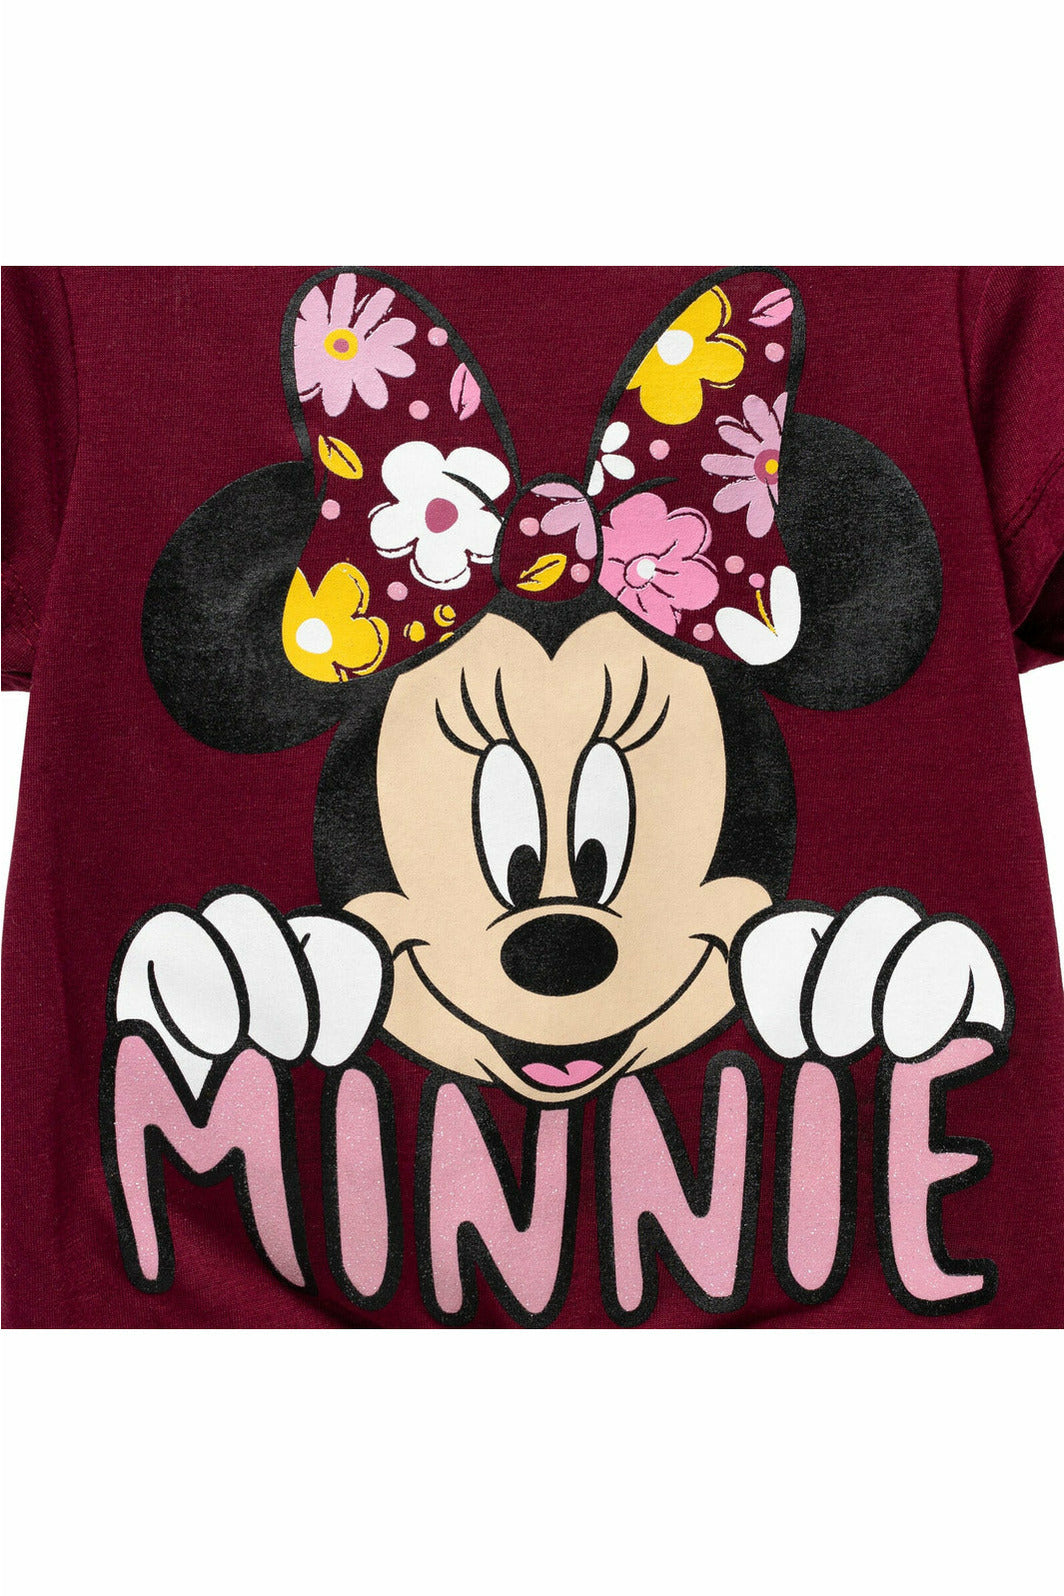 Minnie Mouse Knotted Graphic T-Shirt & Leggings